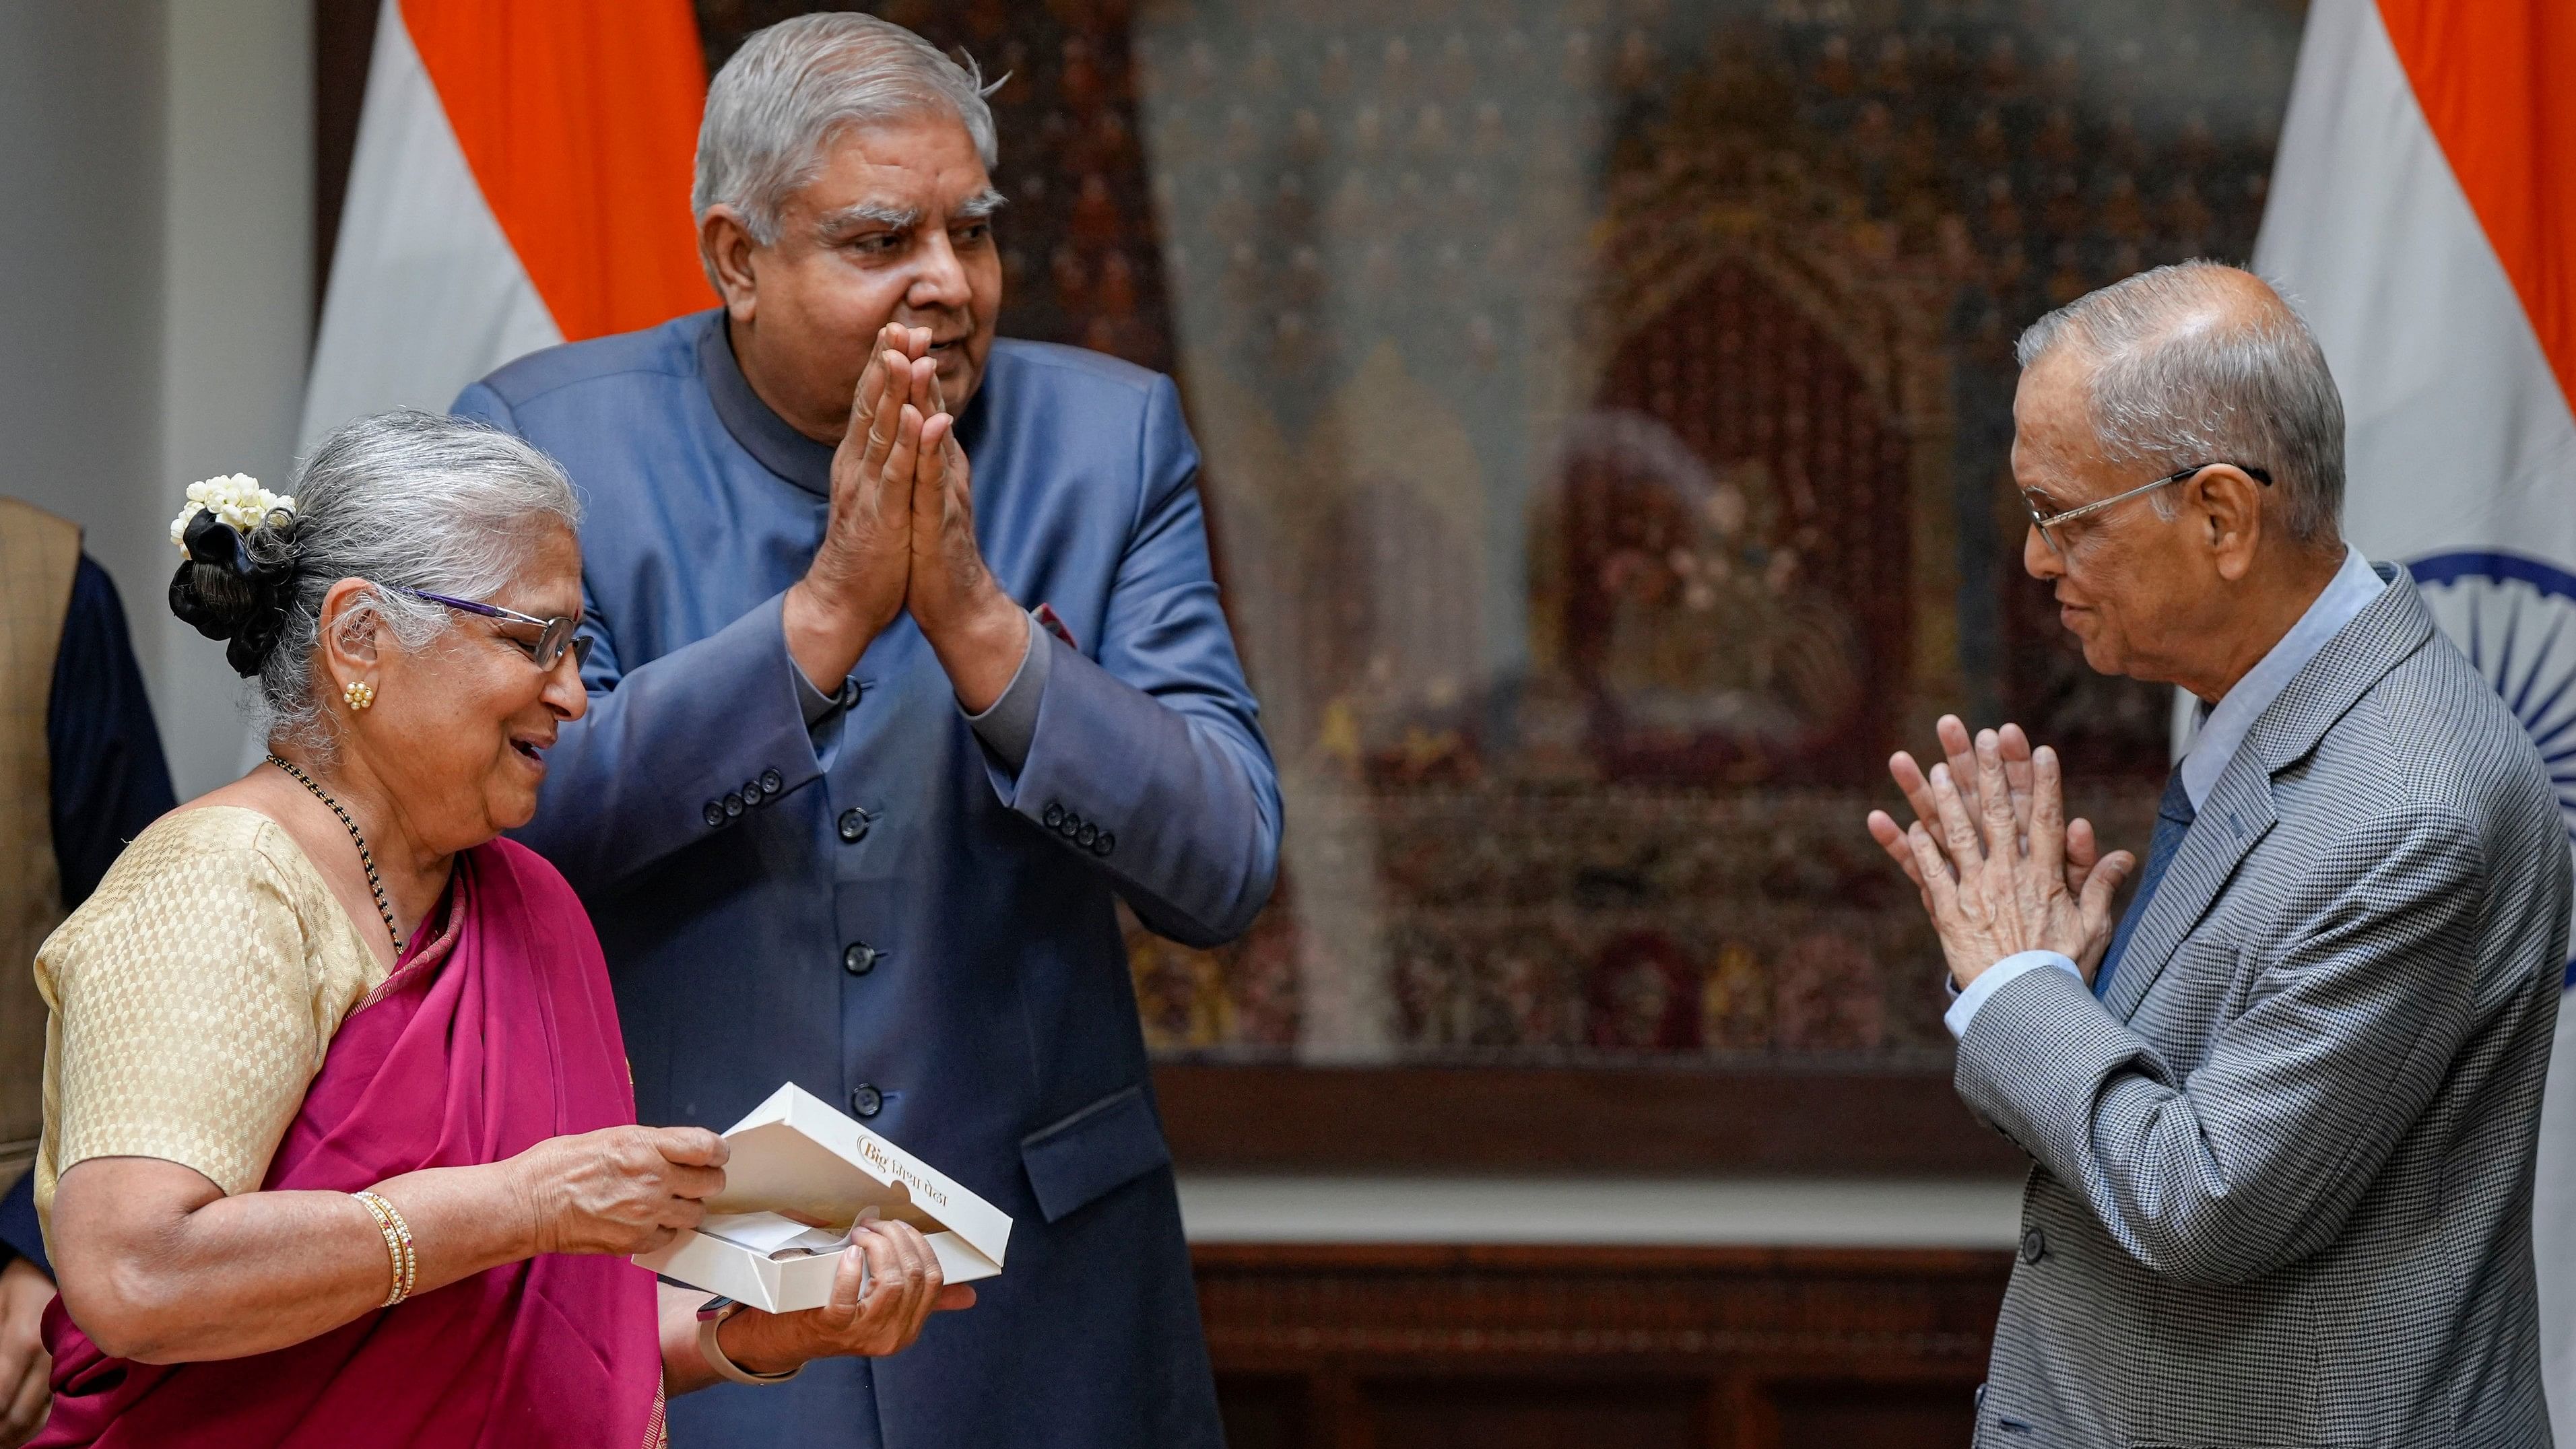 <div class="paragraphs"><p>Philanthropist and author Sudha Murty offers sweet to Rajya Sabha Chairman Jagdeep Dhankhar and Infosys co-founder N R Narayana Murthy after taking oath as Rajya Sabha MP, at Parliament House in New Delhi.</p></div>